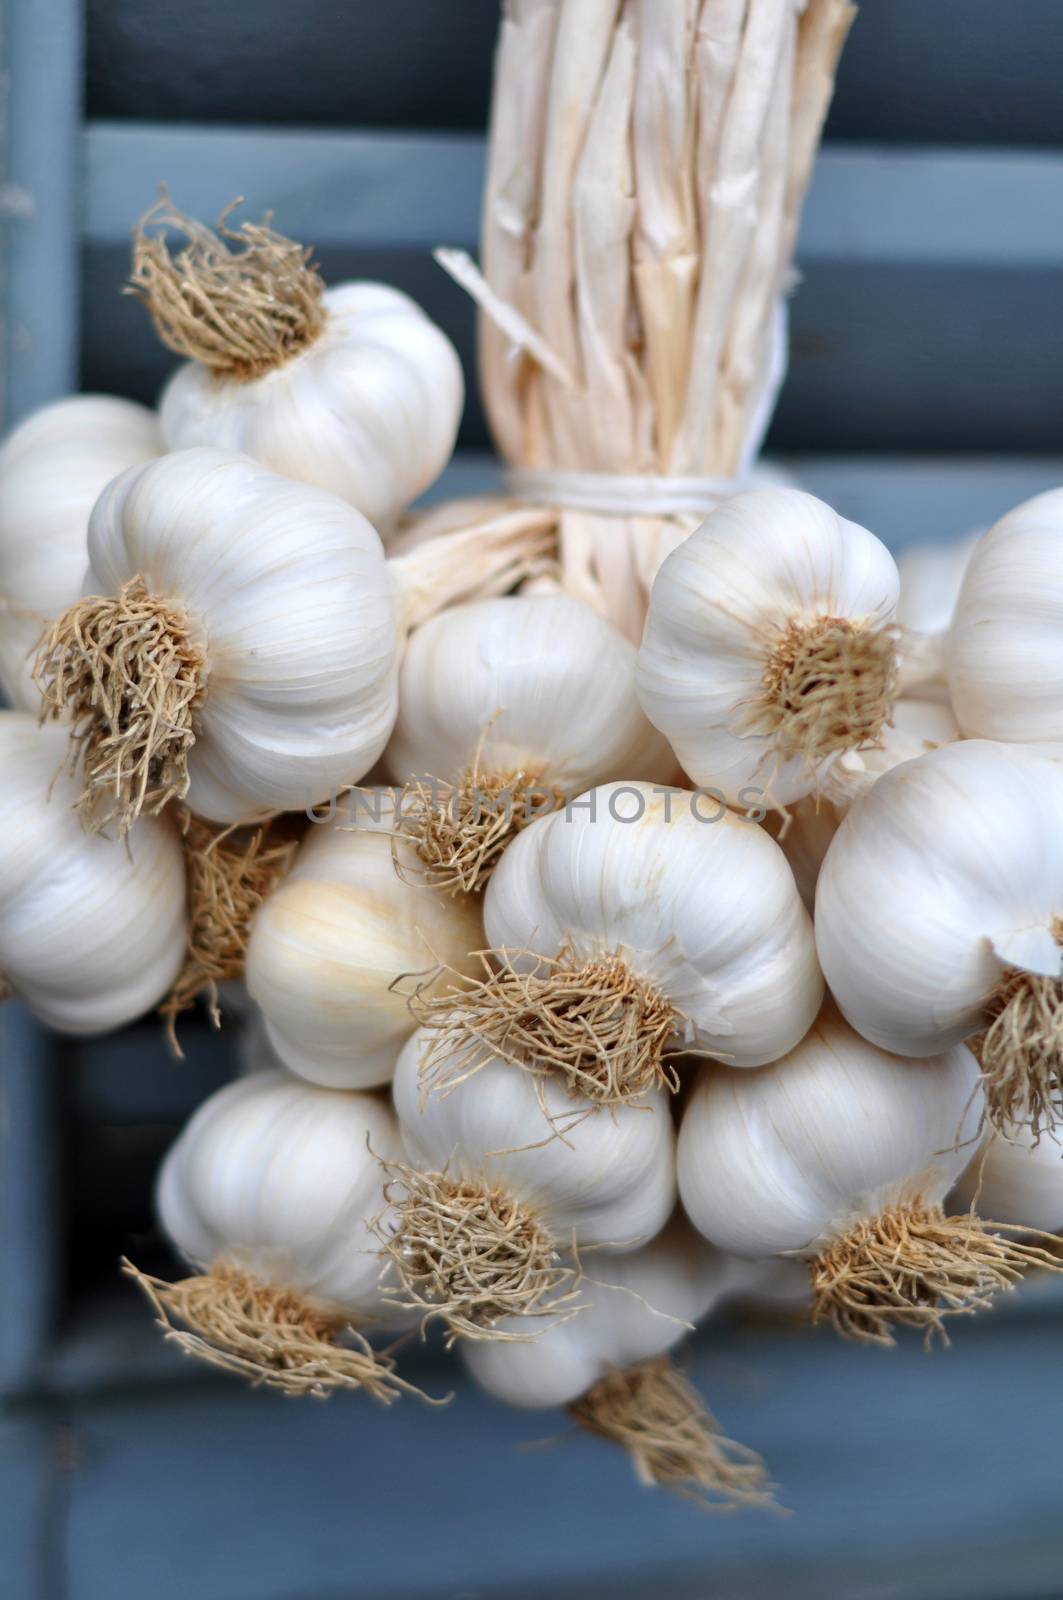 Garlic bulbs braid drying on a shutter of a country house